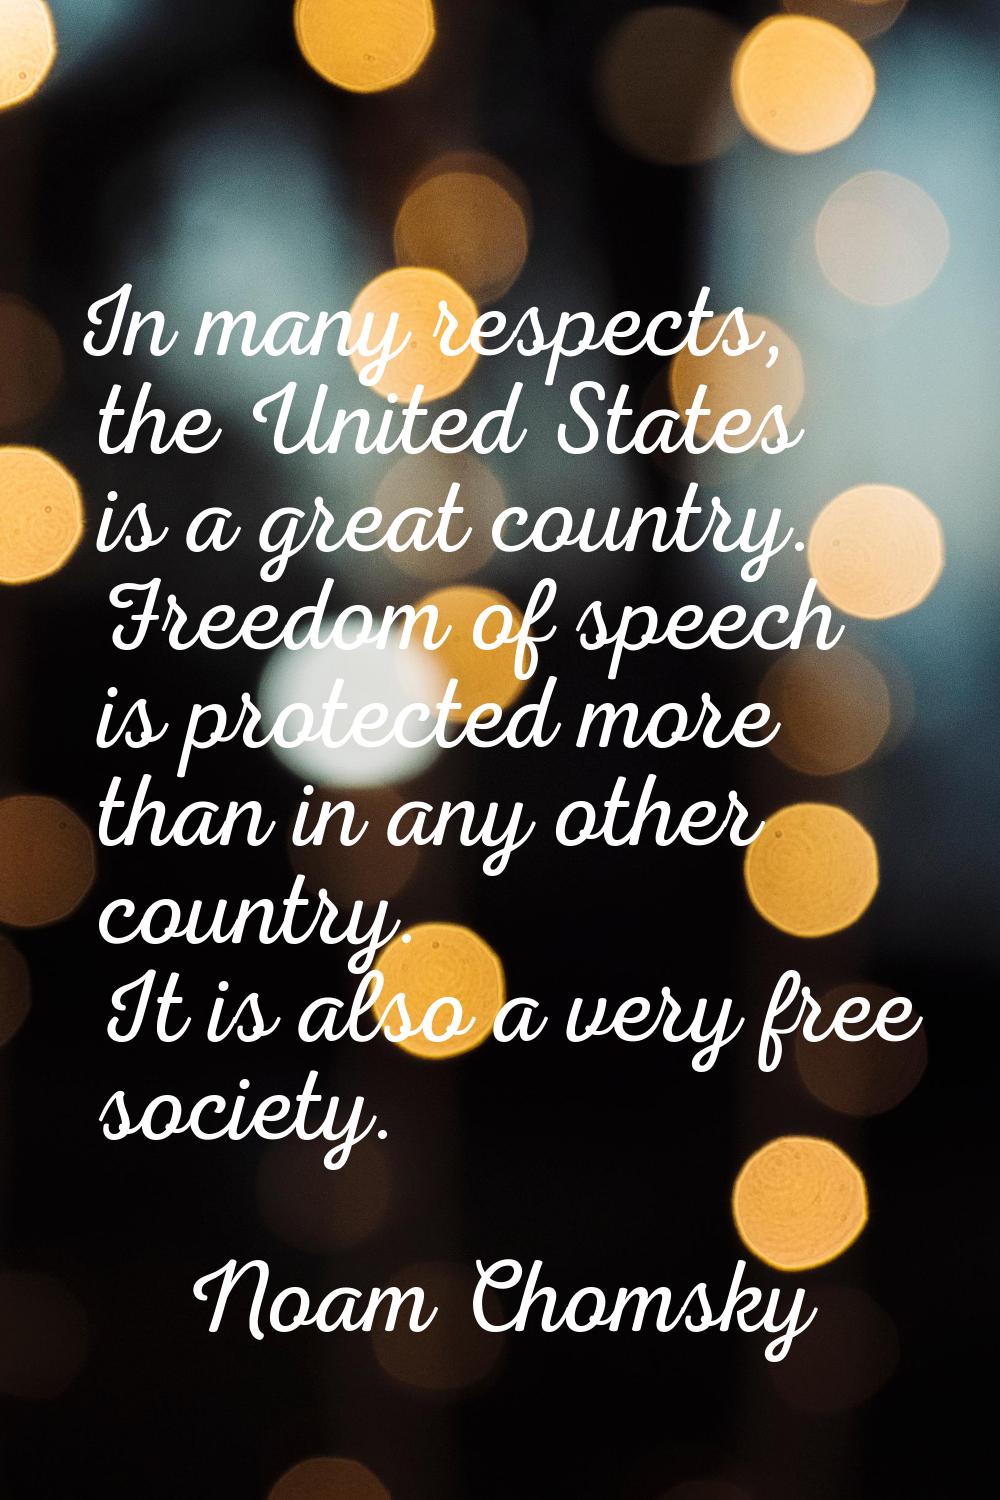 In many respects, the United States is a great country. Freedom of speech is protected more than in